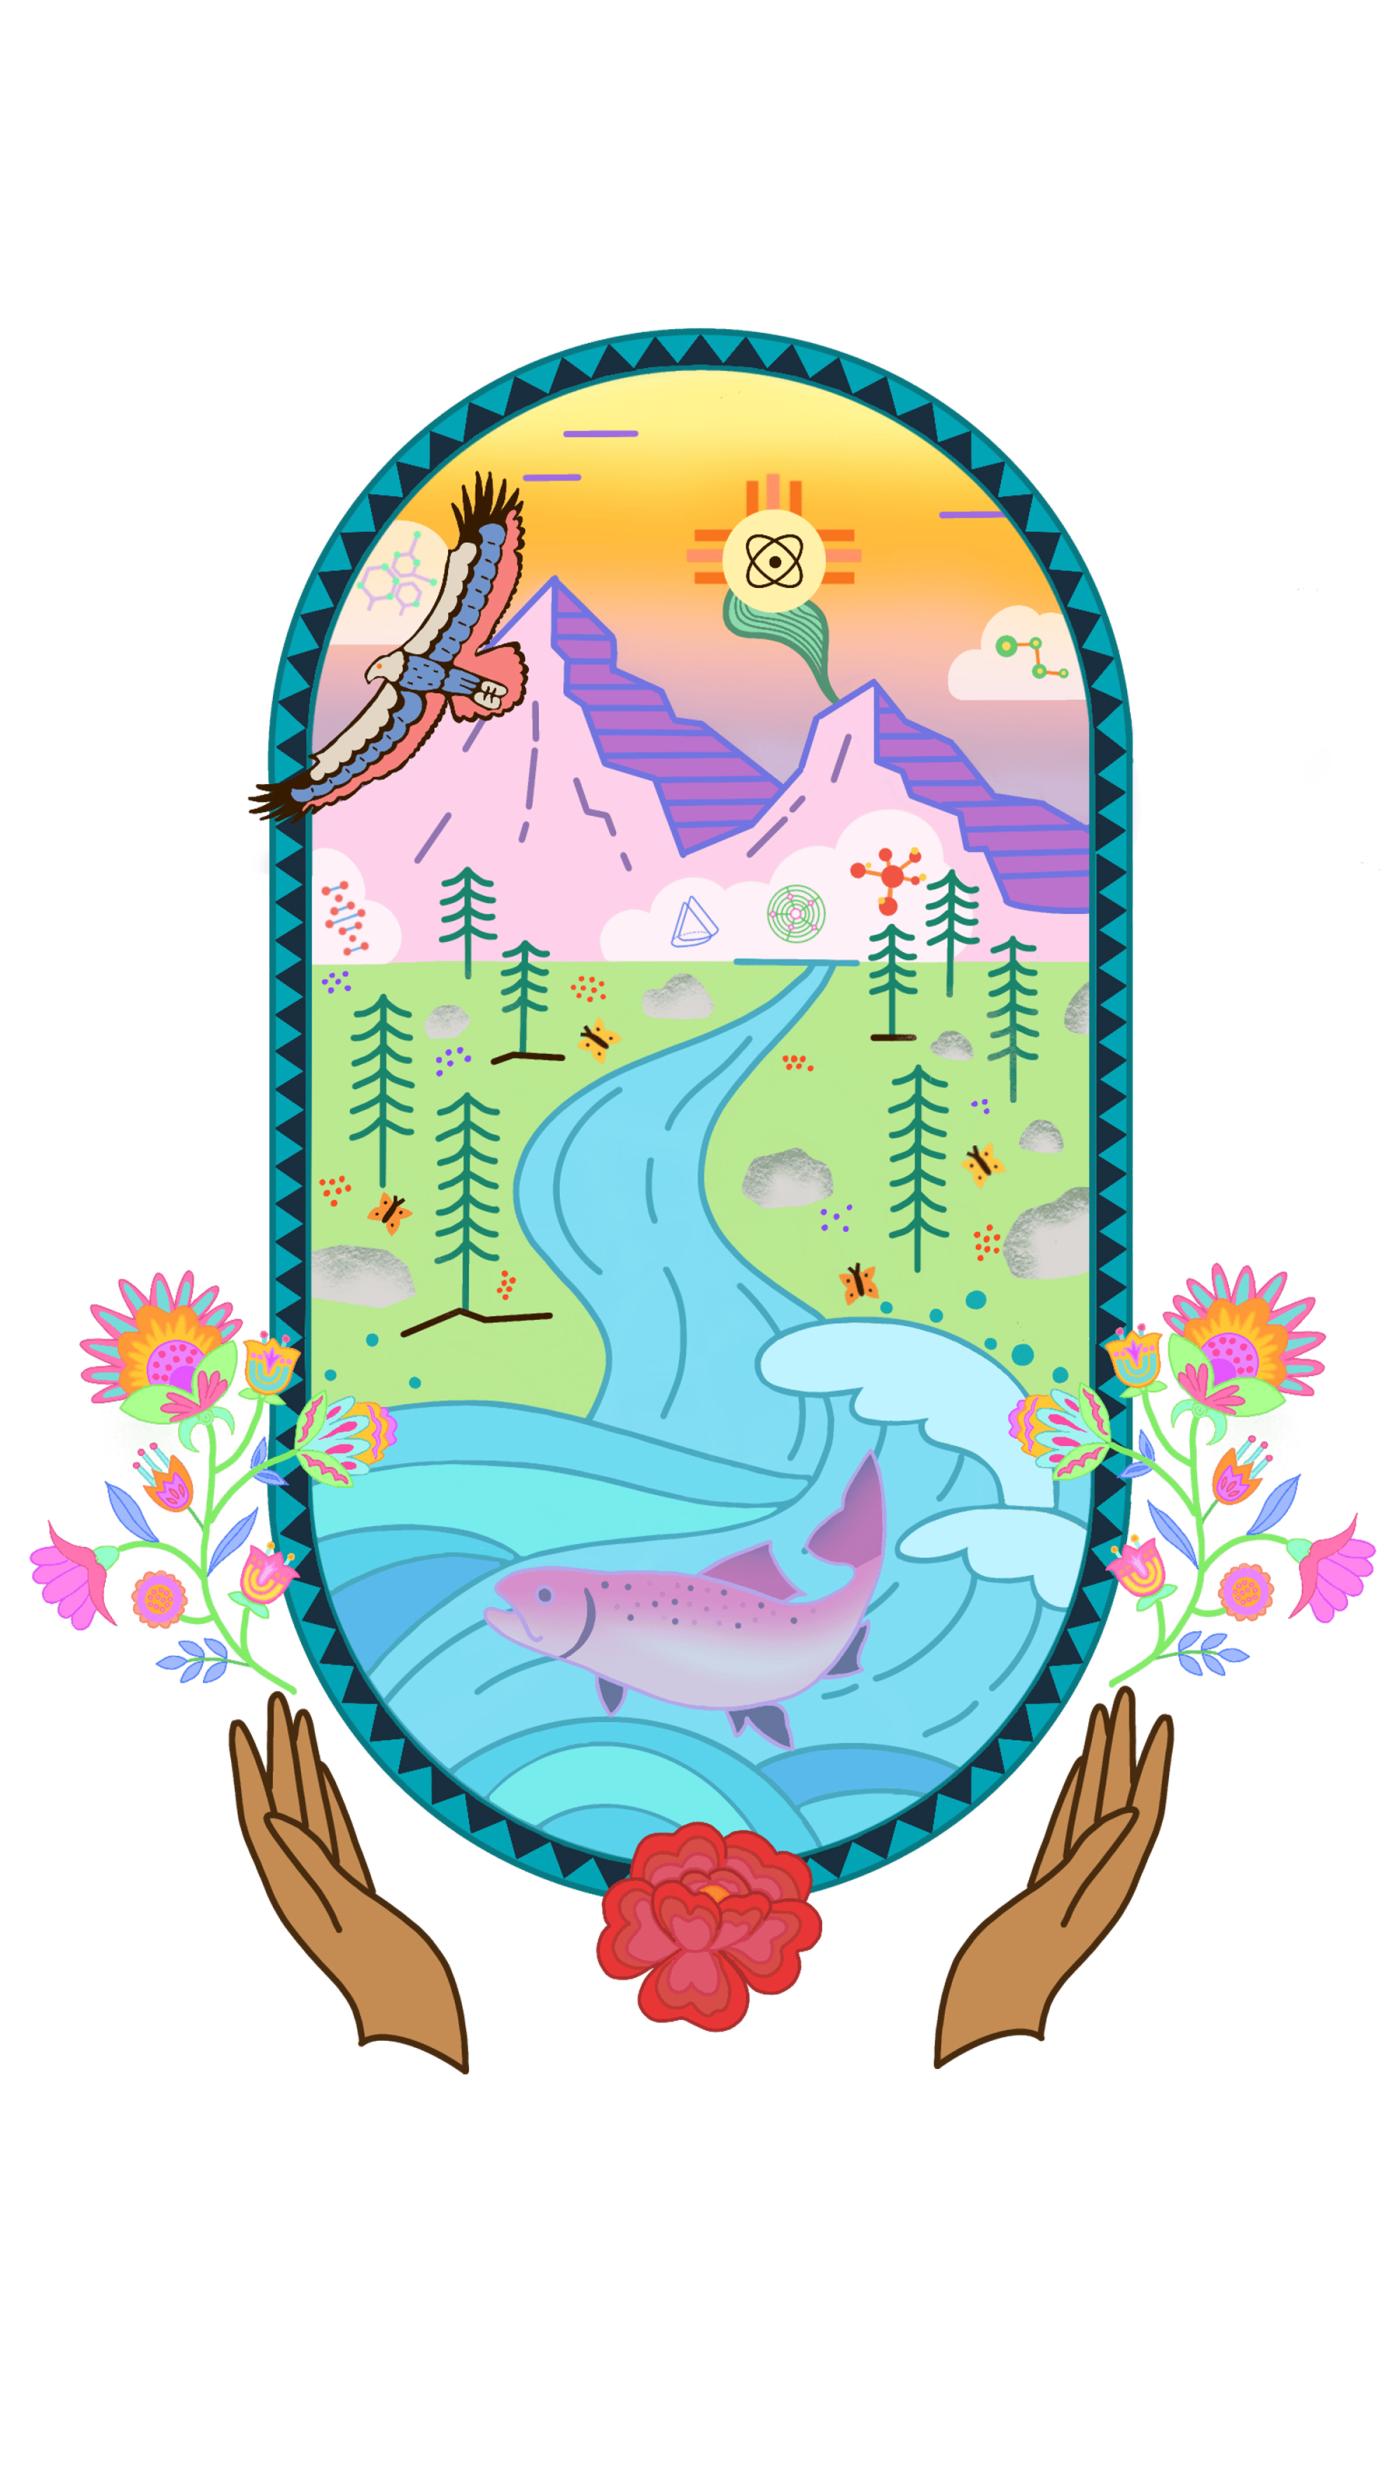 An illustration in an oval frame depicts mountains, forests, and sacred waters, as well as an eagle at the top left, a salmon at the bottom center, and butterflies and scientific symbols scattered throughout. Two hands cup the bottom of the oval frame from underneath. Multicolored flowers bloom on either side of the hands and frame, and one red flower blooms between the wrists of the hands.